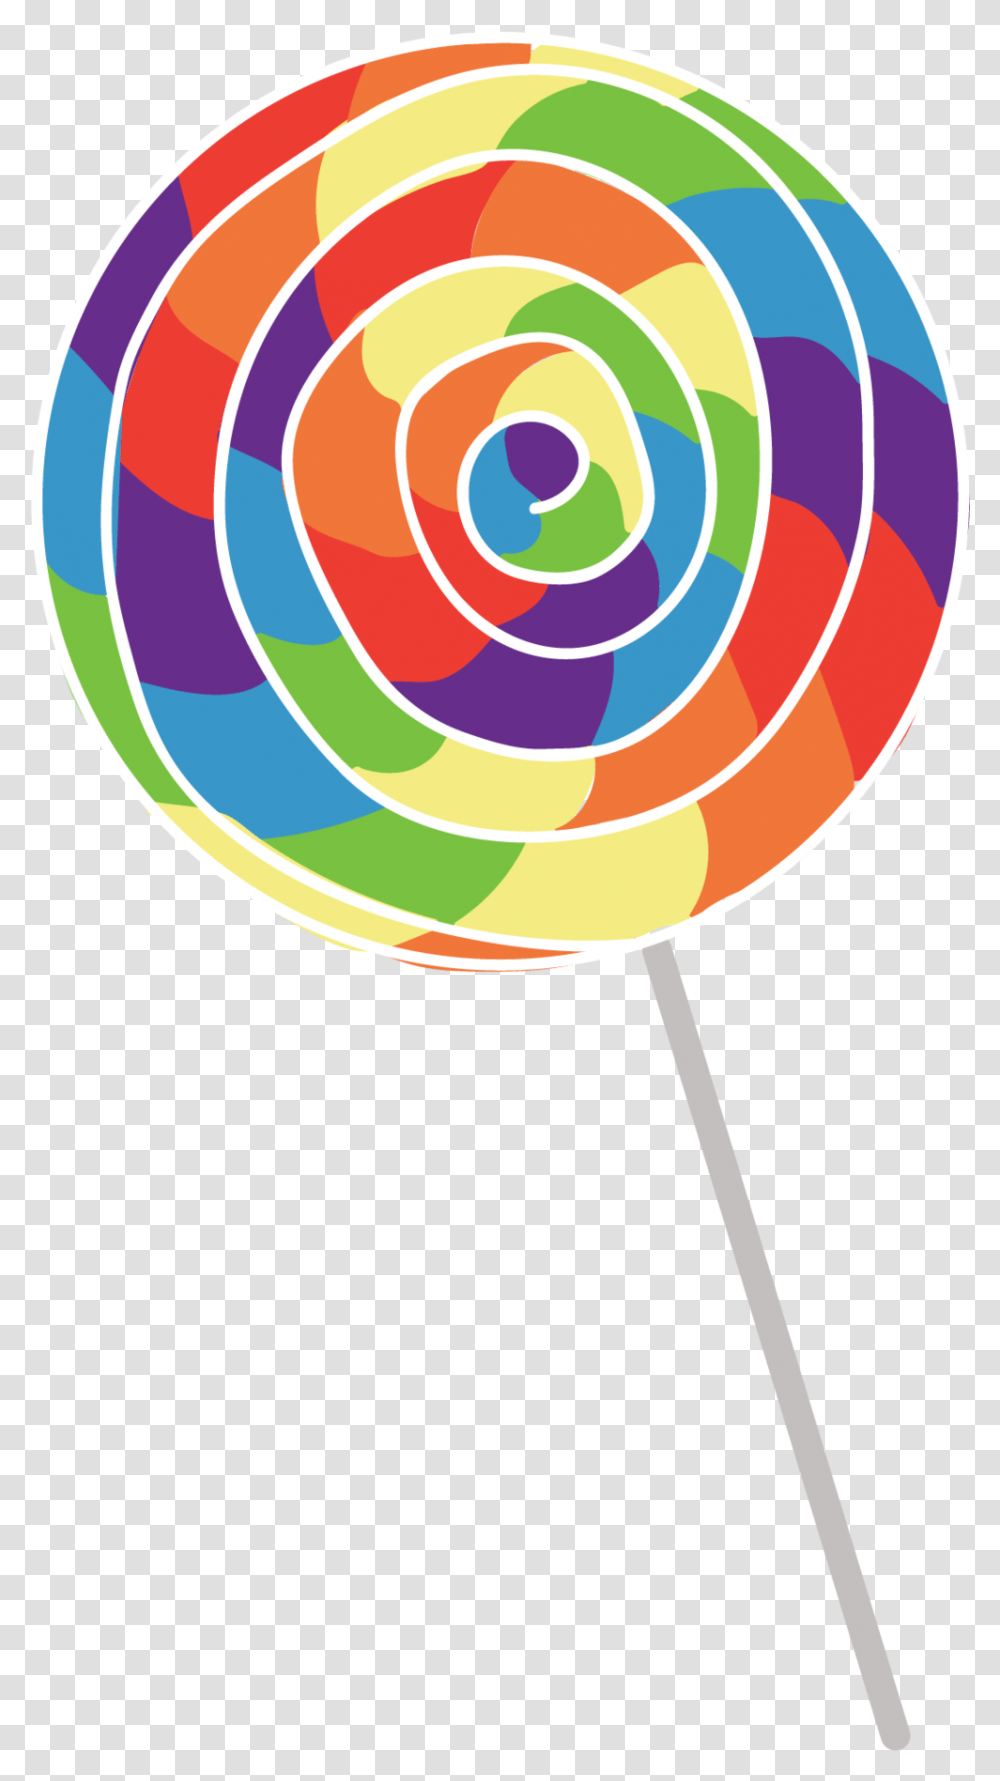 Download Rainbow Lollildpi Circle Image With No Rainbow Lollipop Clipart, Food, Candy, Sweets, Confectionery Transparent Png